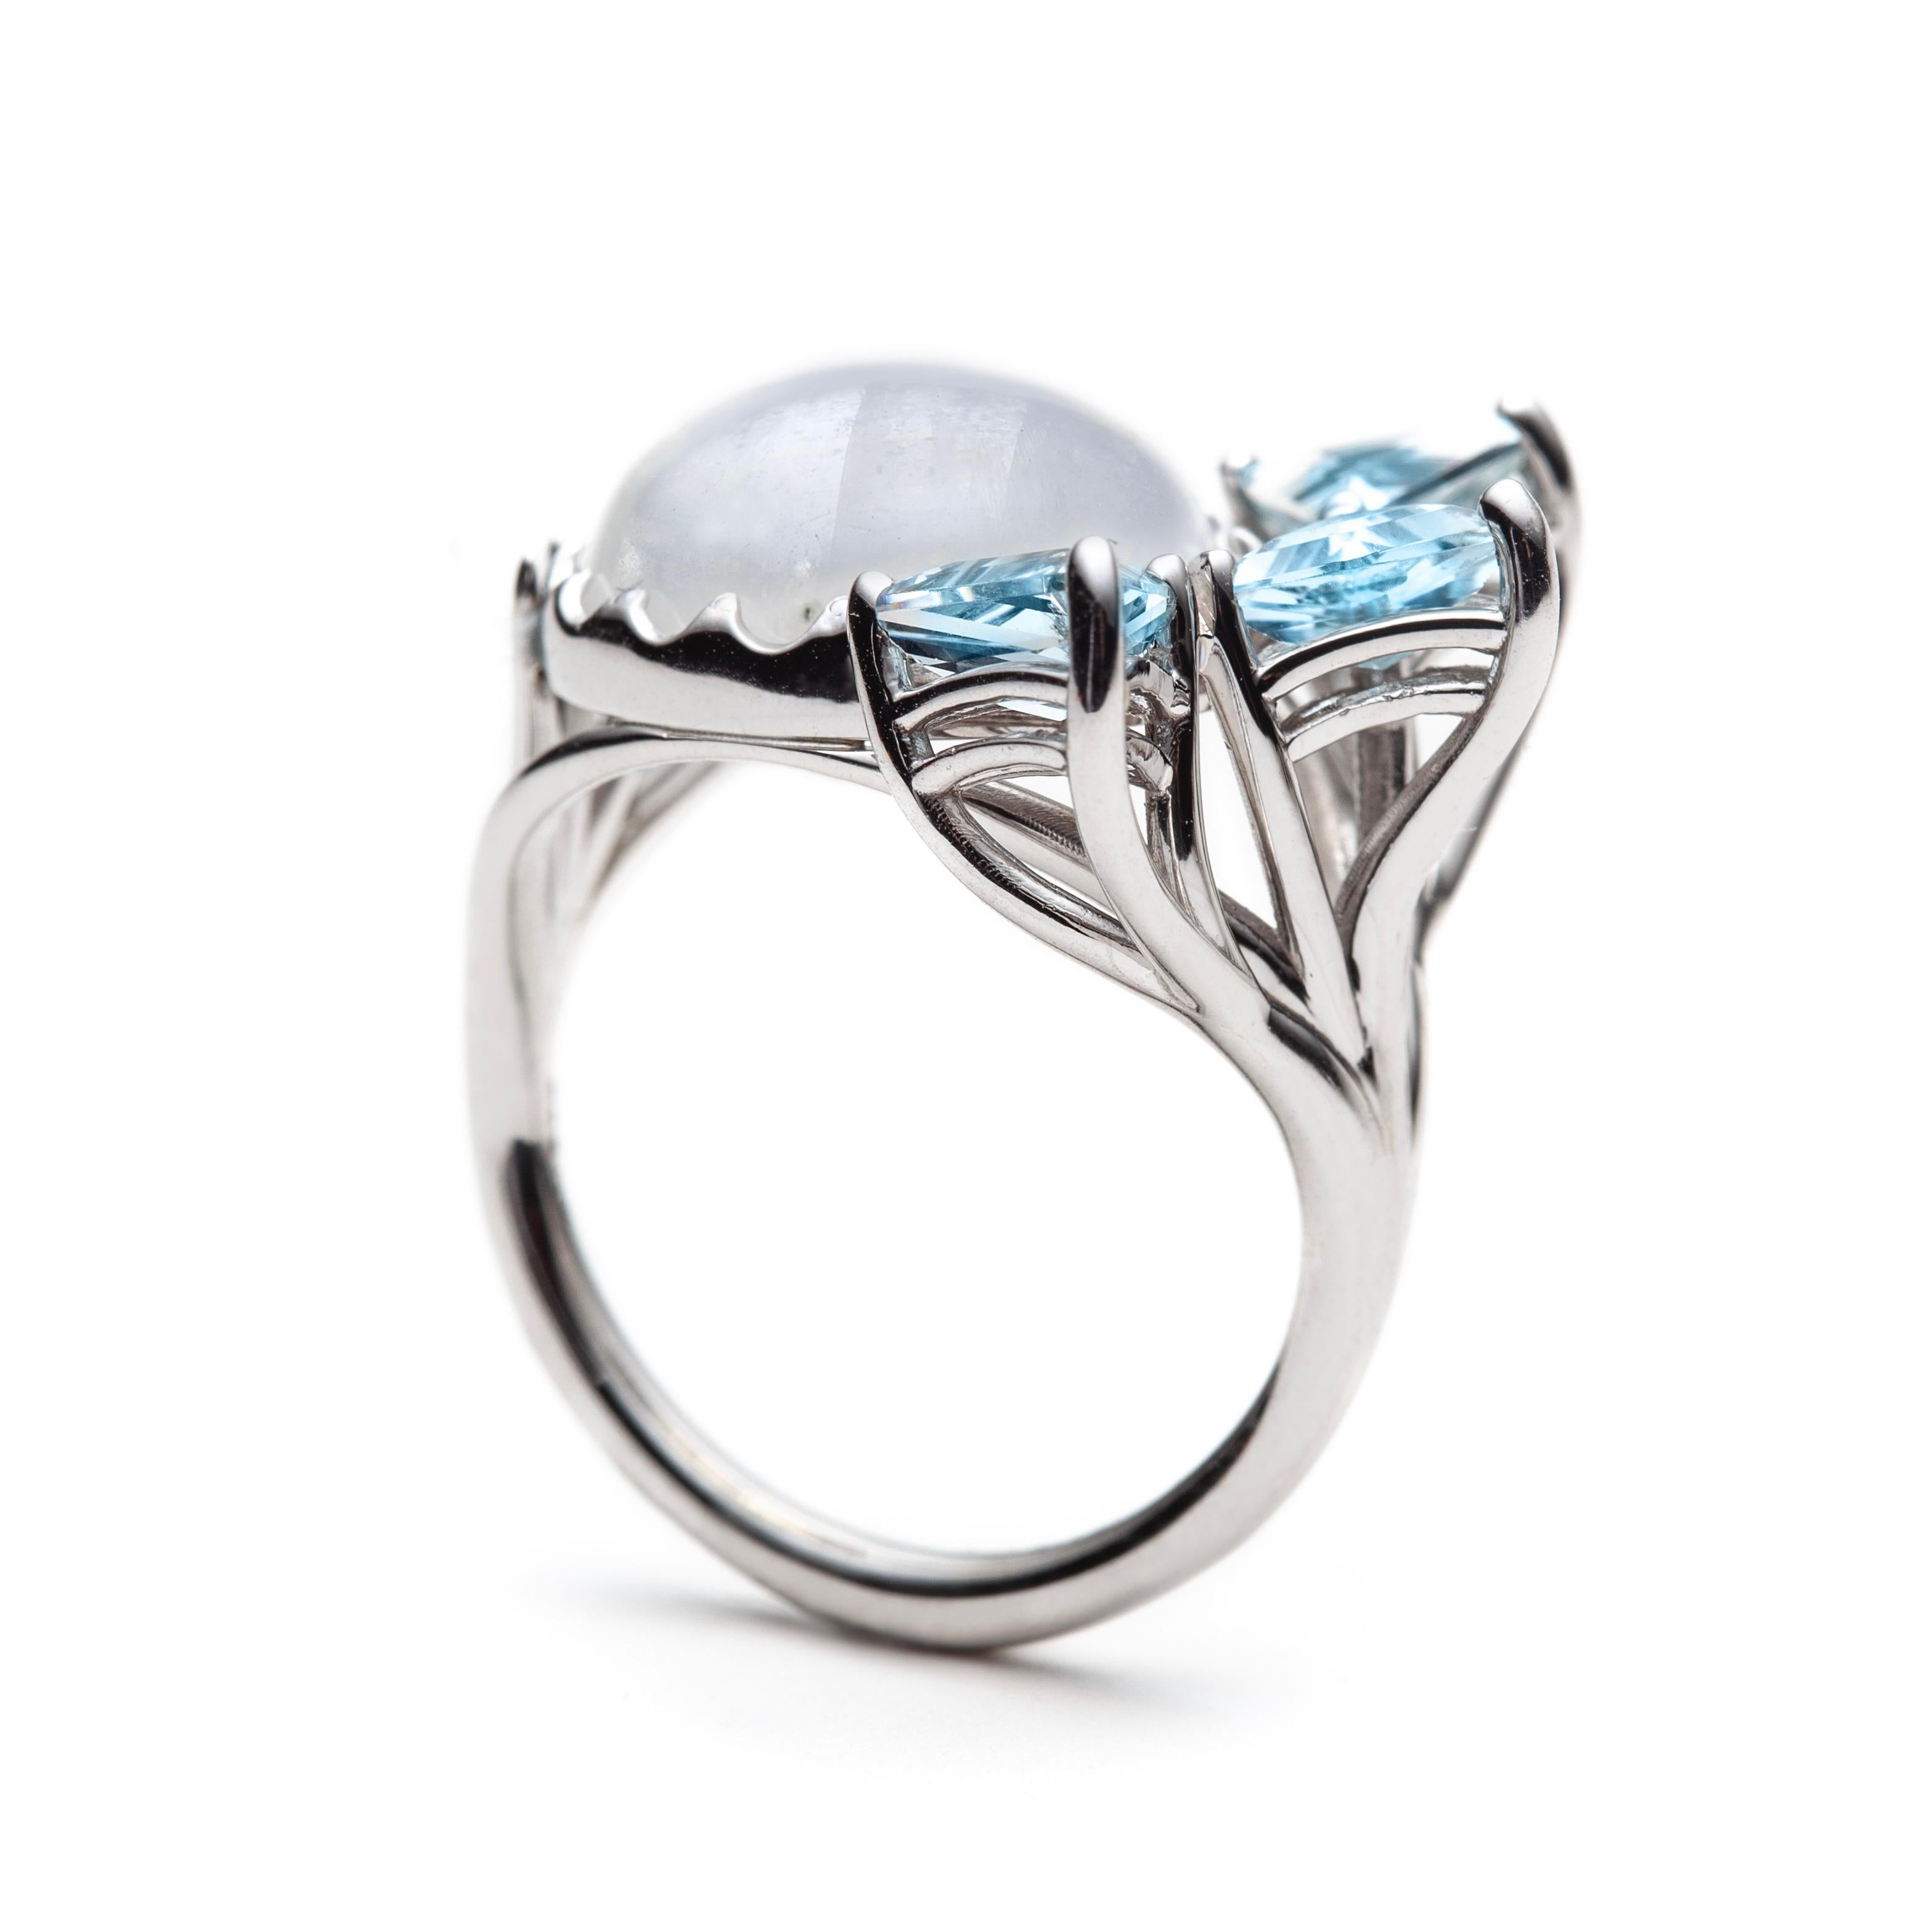 For Sale:  14k White Gold Ring set with a Moonstone Cabochon and Triangular Aquamarines 3